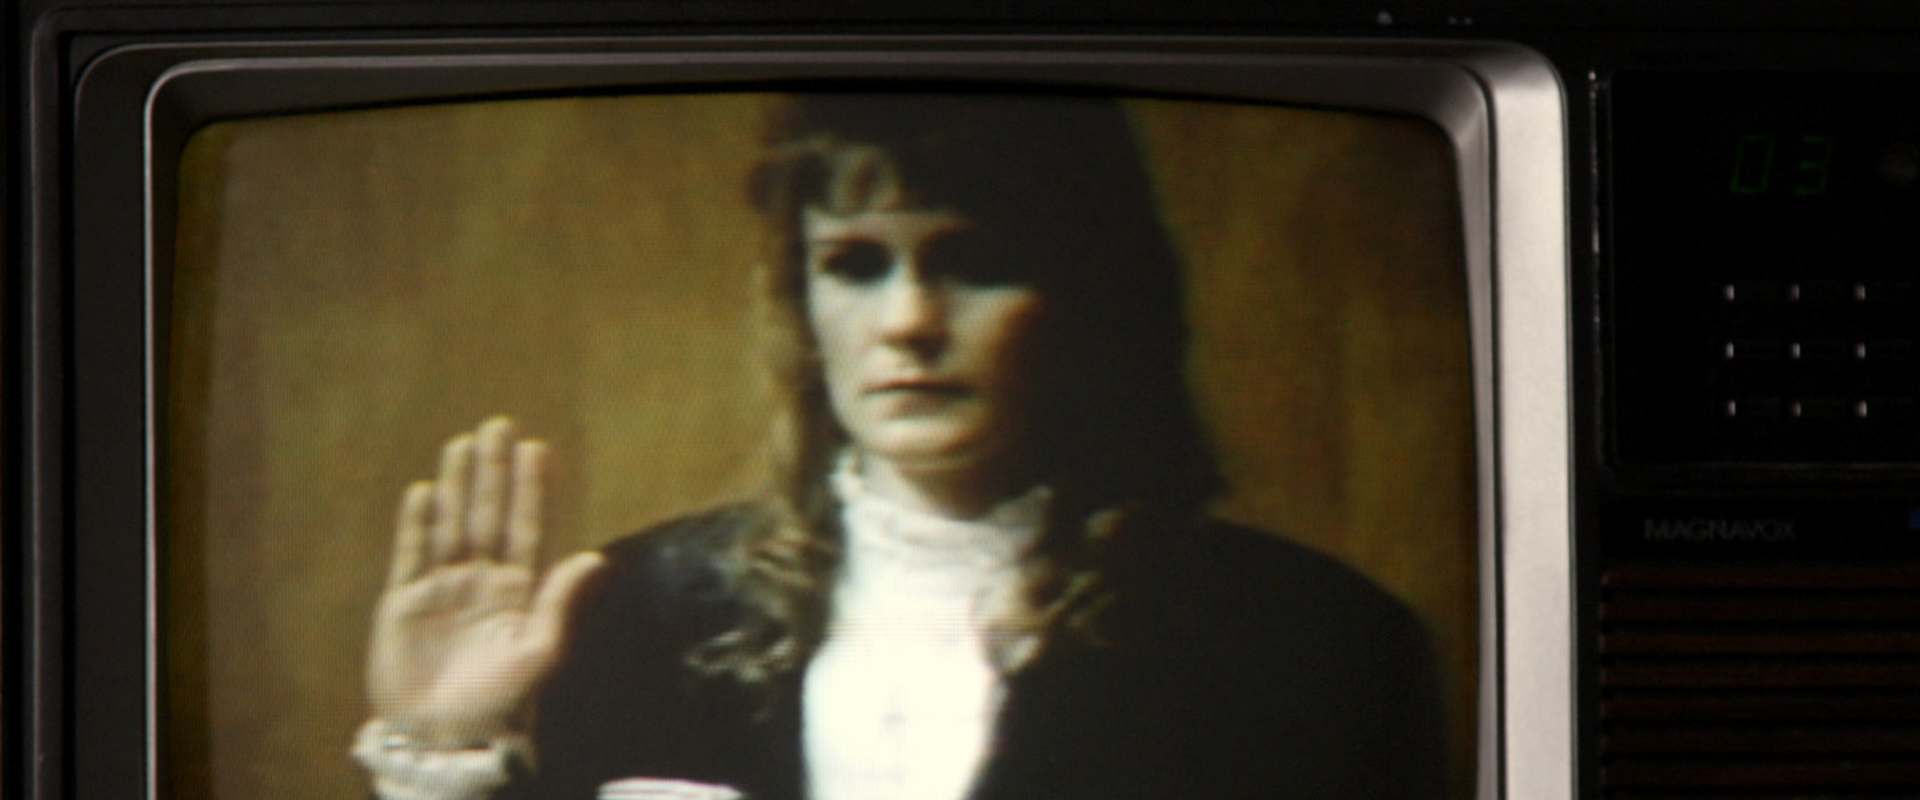 Captivated: The Trials of Pamela Smart background 2